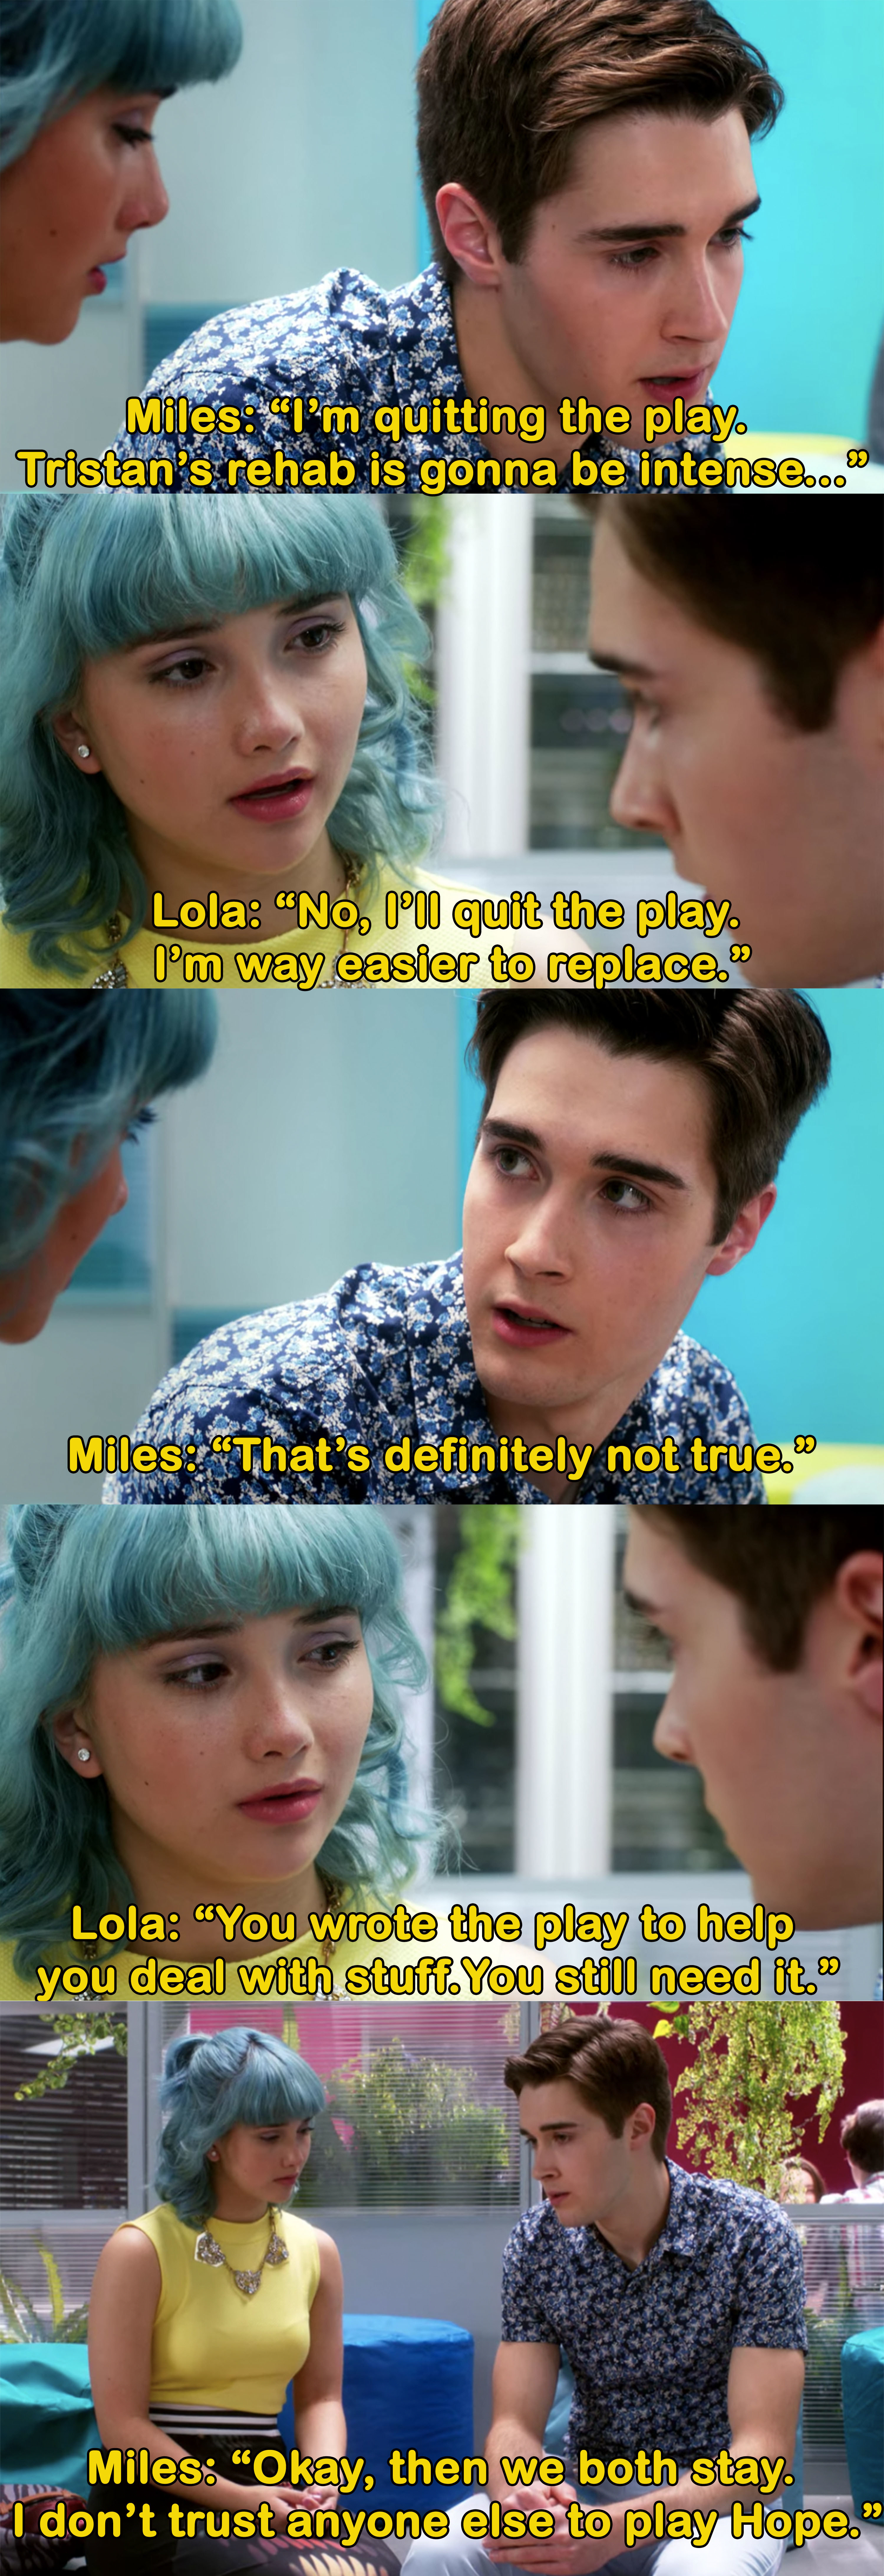 Miles breaks it off with Lola, but they both decide to both stay in the play because Miles &quot;doesn&#x27;t trust anyone else to play Hope&quot;